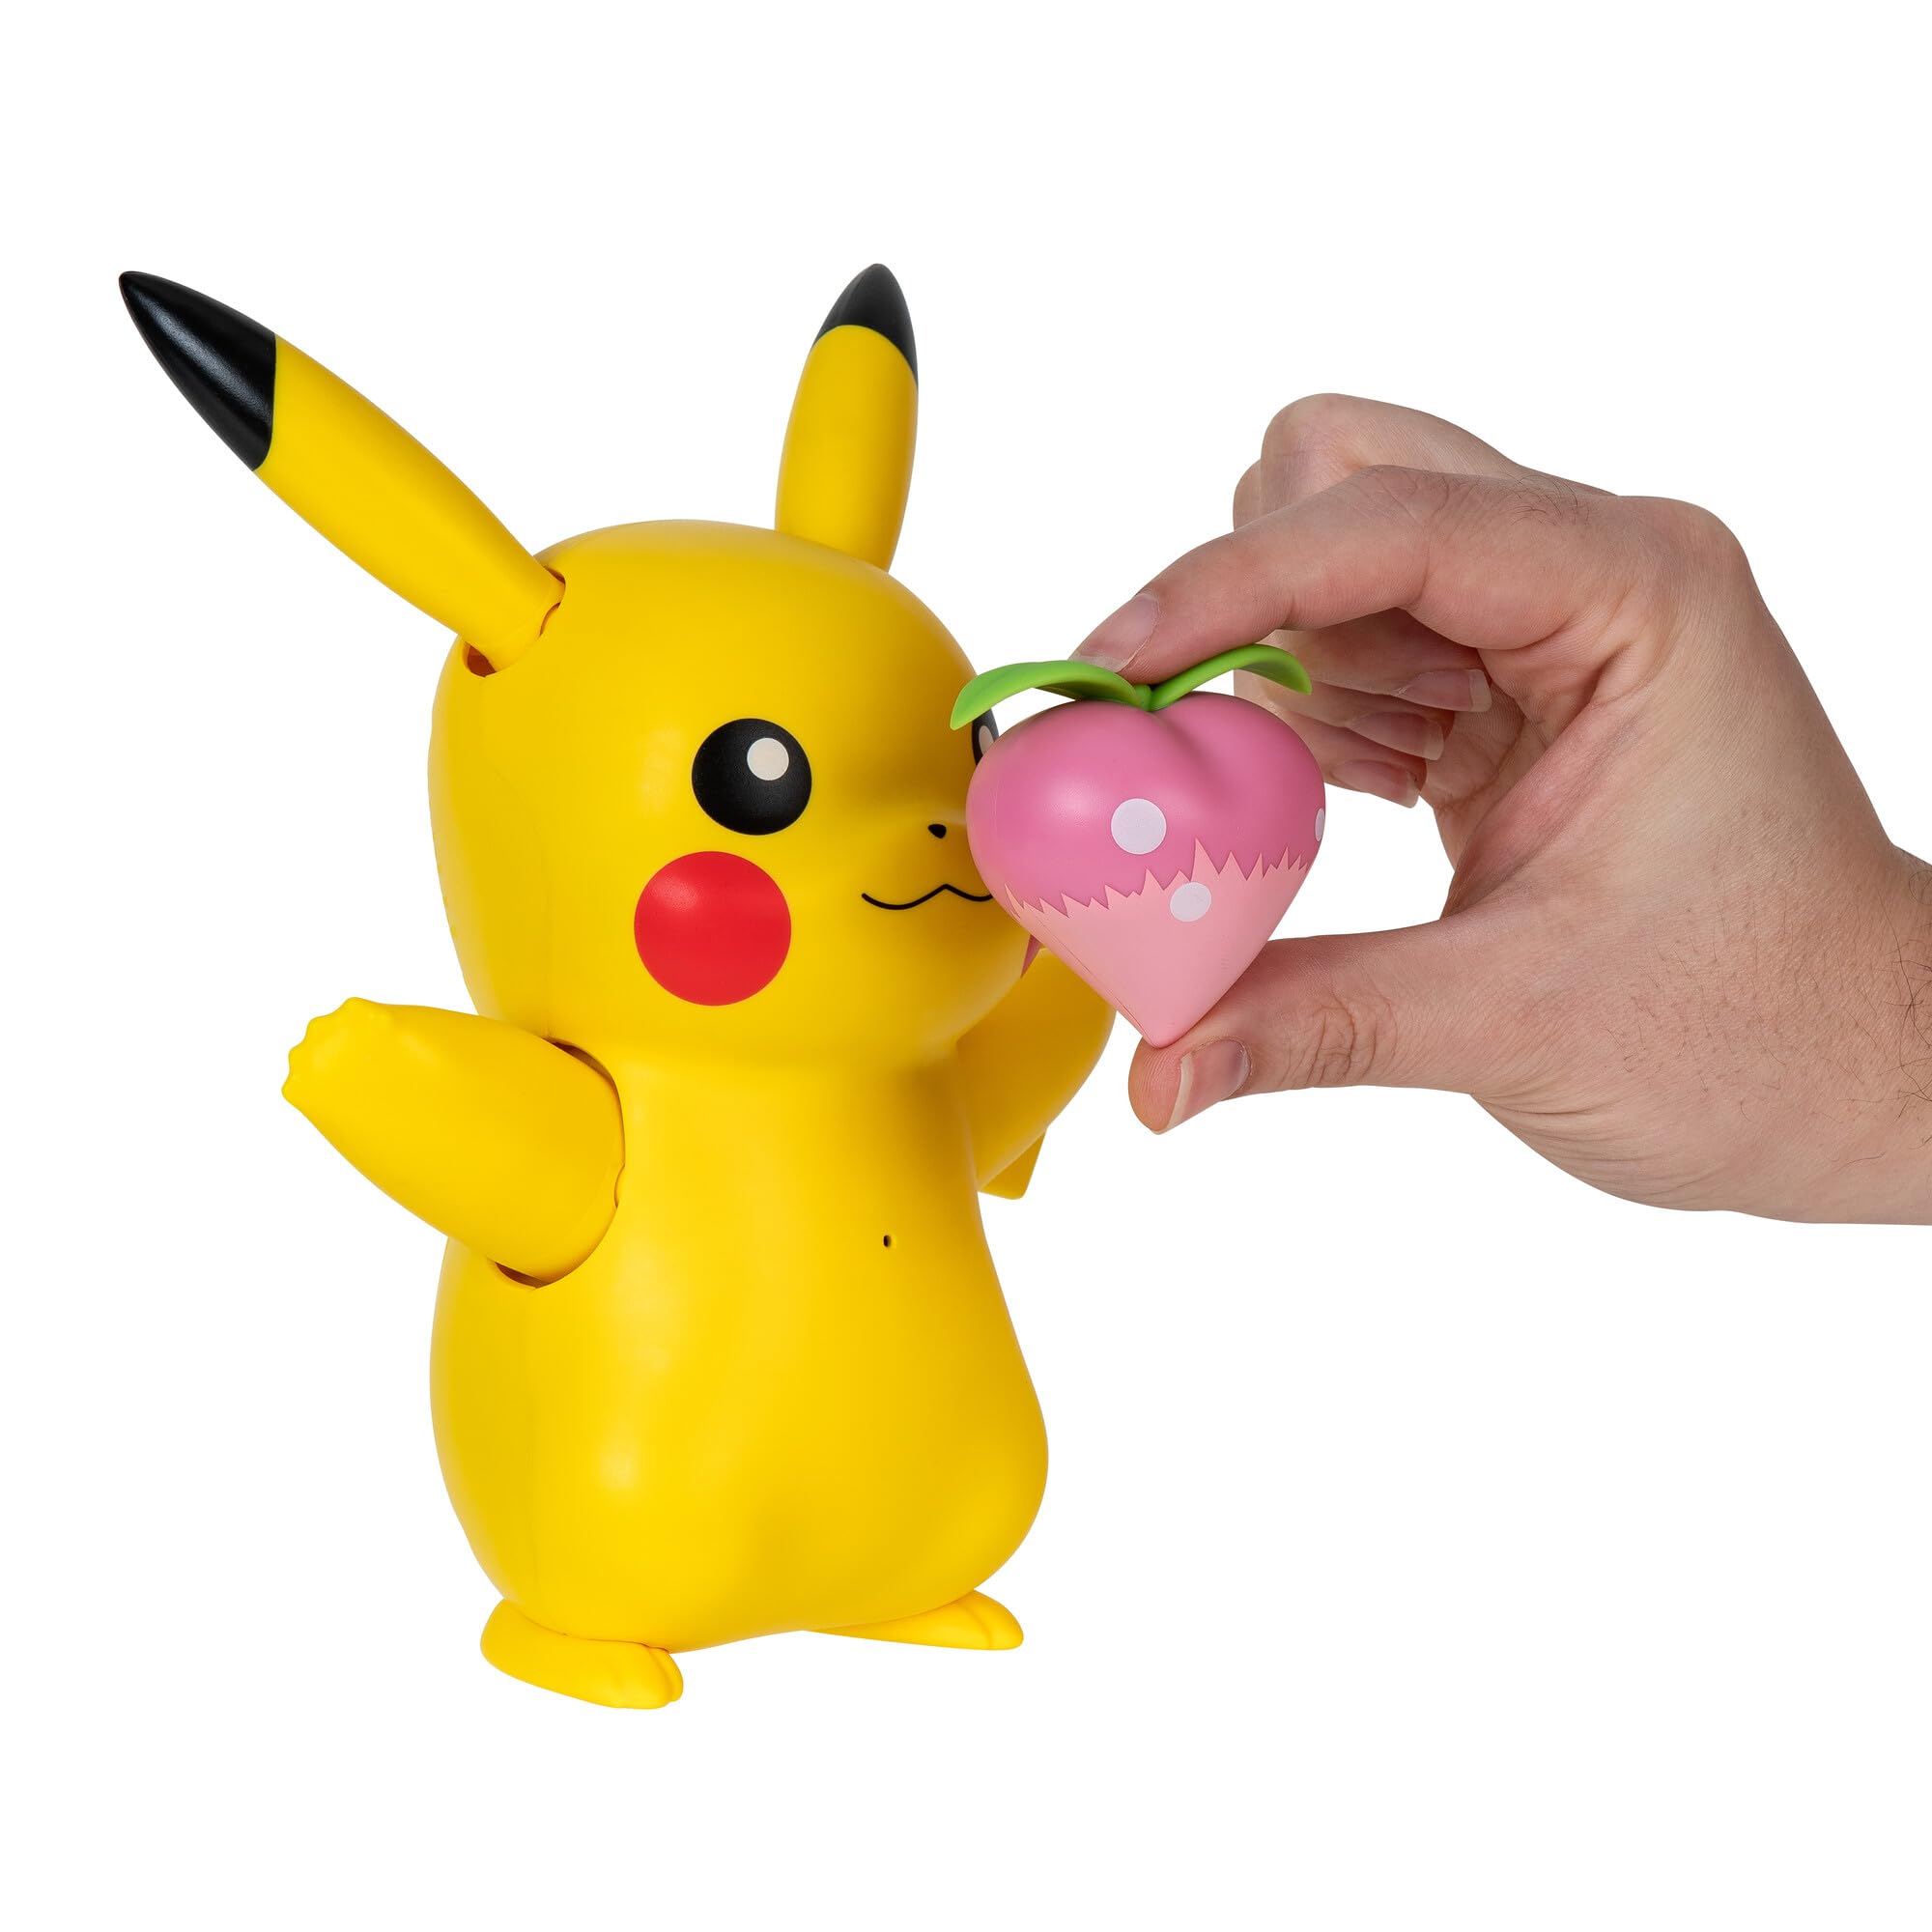 Pokemon Train and Play Deluxe Pikachu - 4.5-Inch Pikachu Figure with Lights, Sounds, and Moving Limbs Plus Interactive Accessories